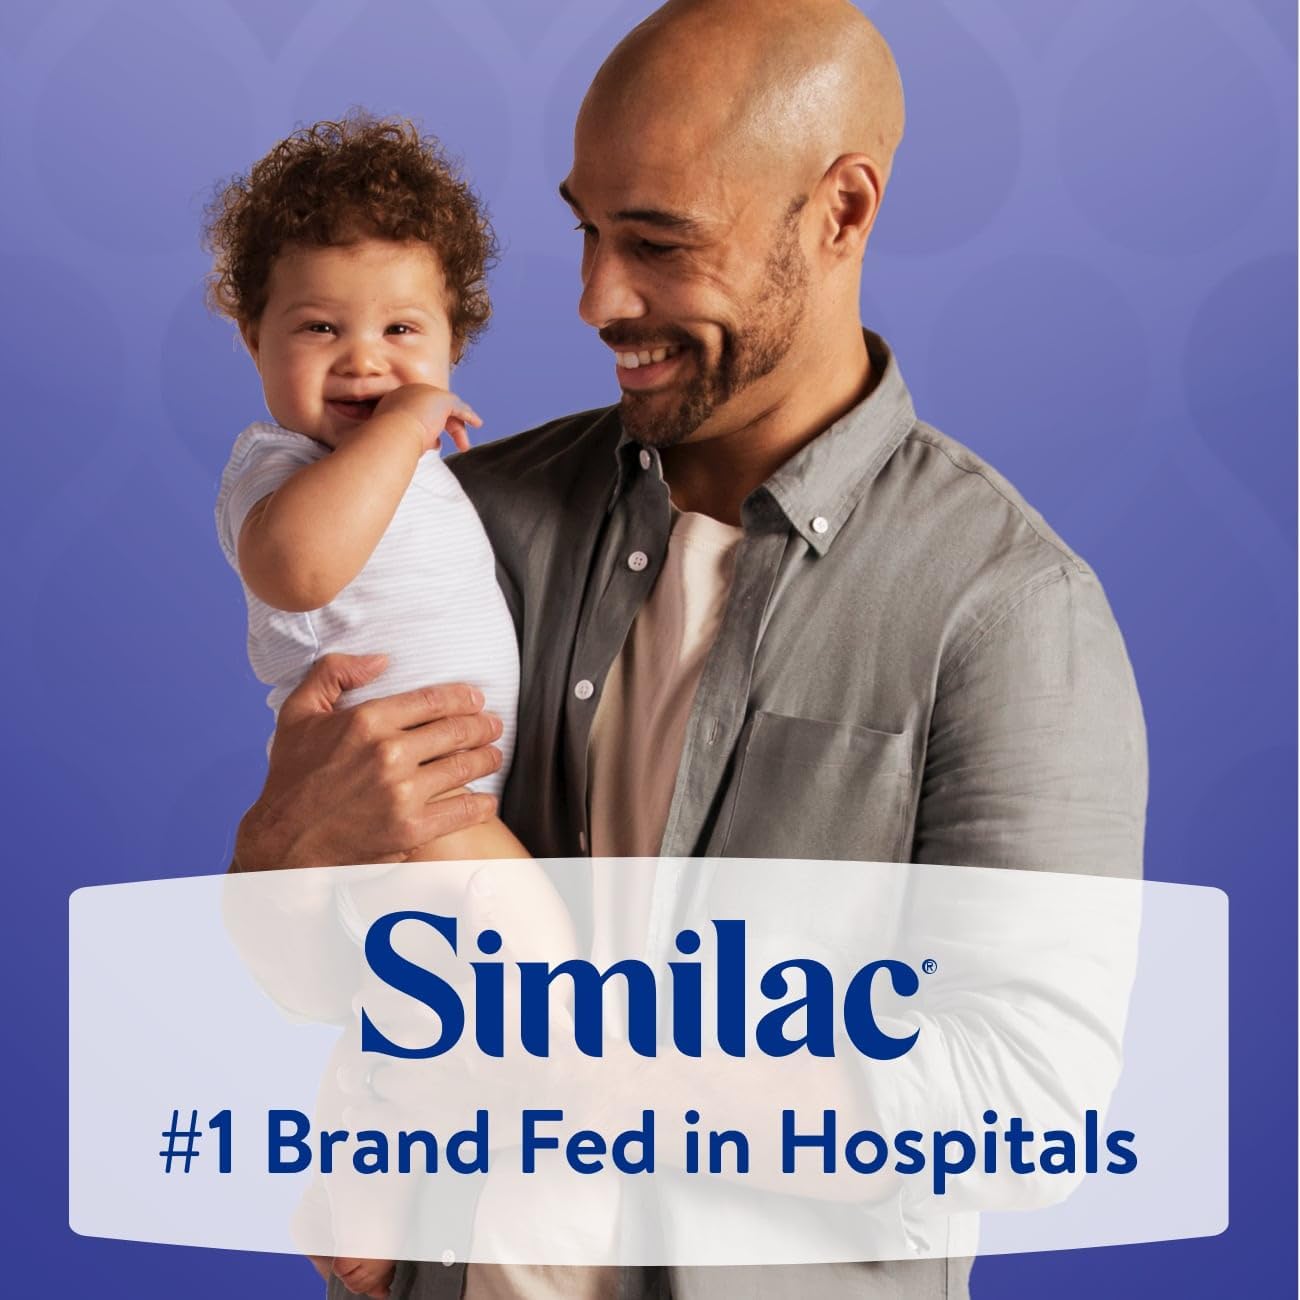 Similac Pro-Total Comfort* Infant Formula with Iron, Gentle, Easy-to-Digest Formula, with 2'-FL HMO for Immune Support, Non-GMO, Ready-to-Feed Baby Formula, 2-fl-oz Bottle, Pack of 48